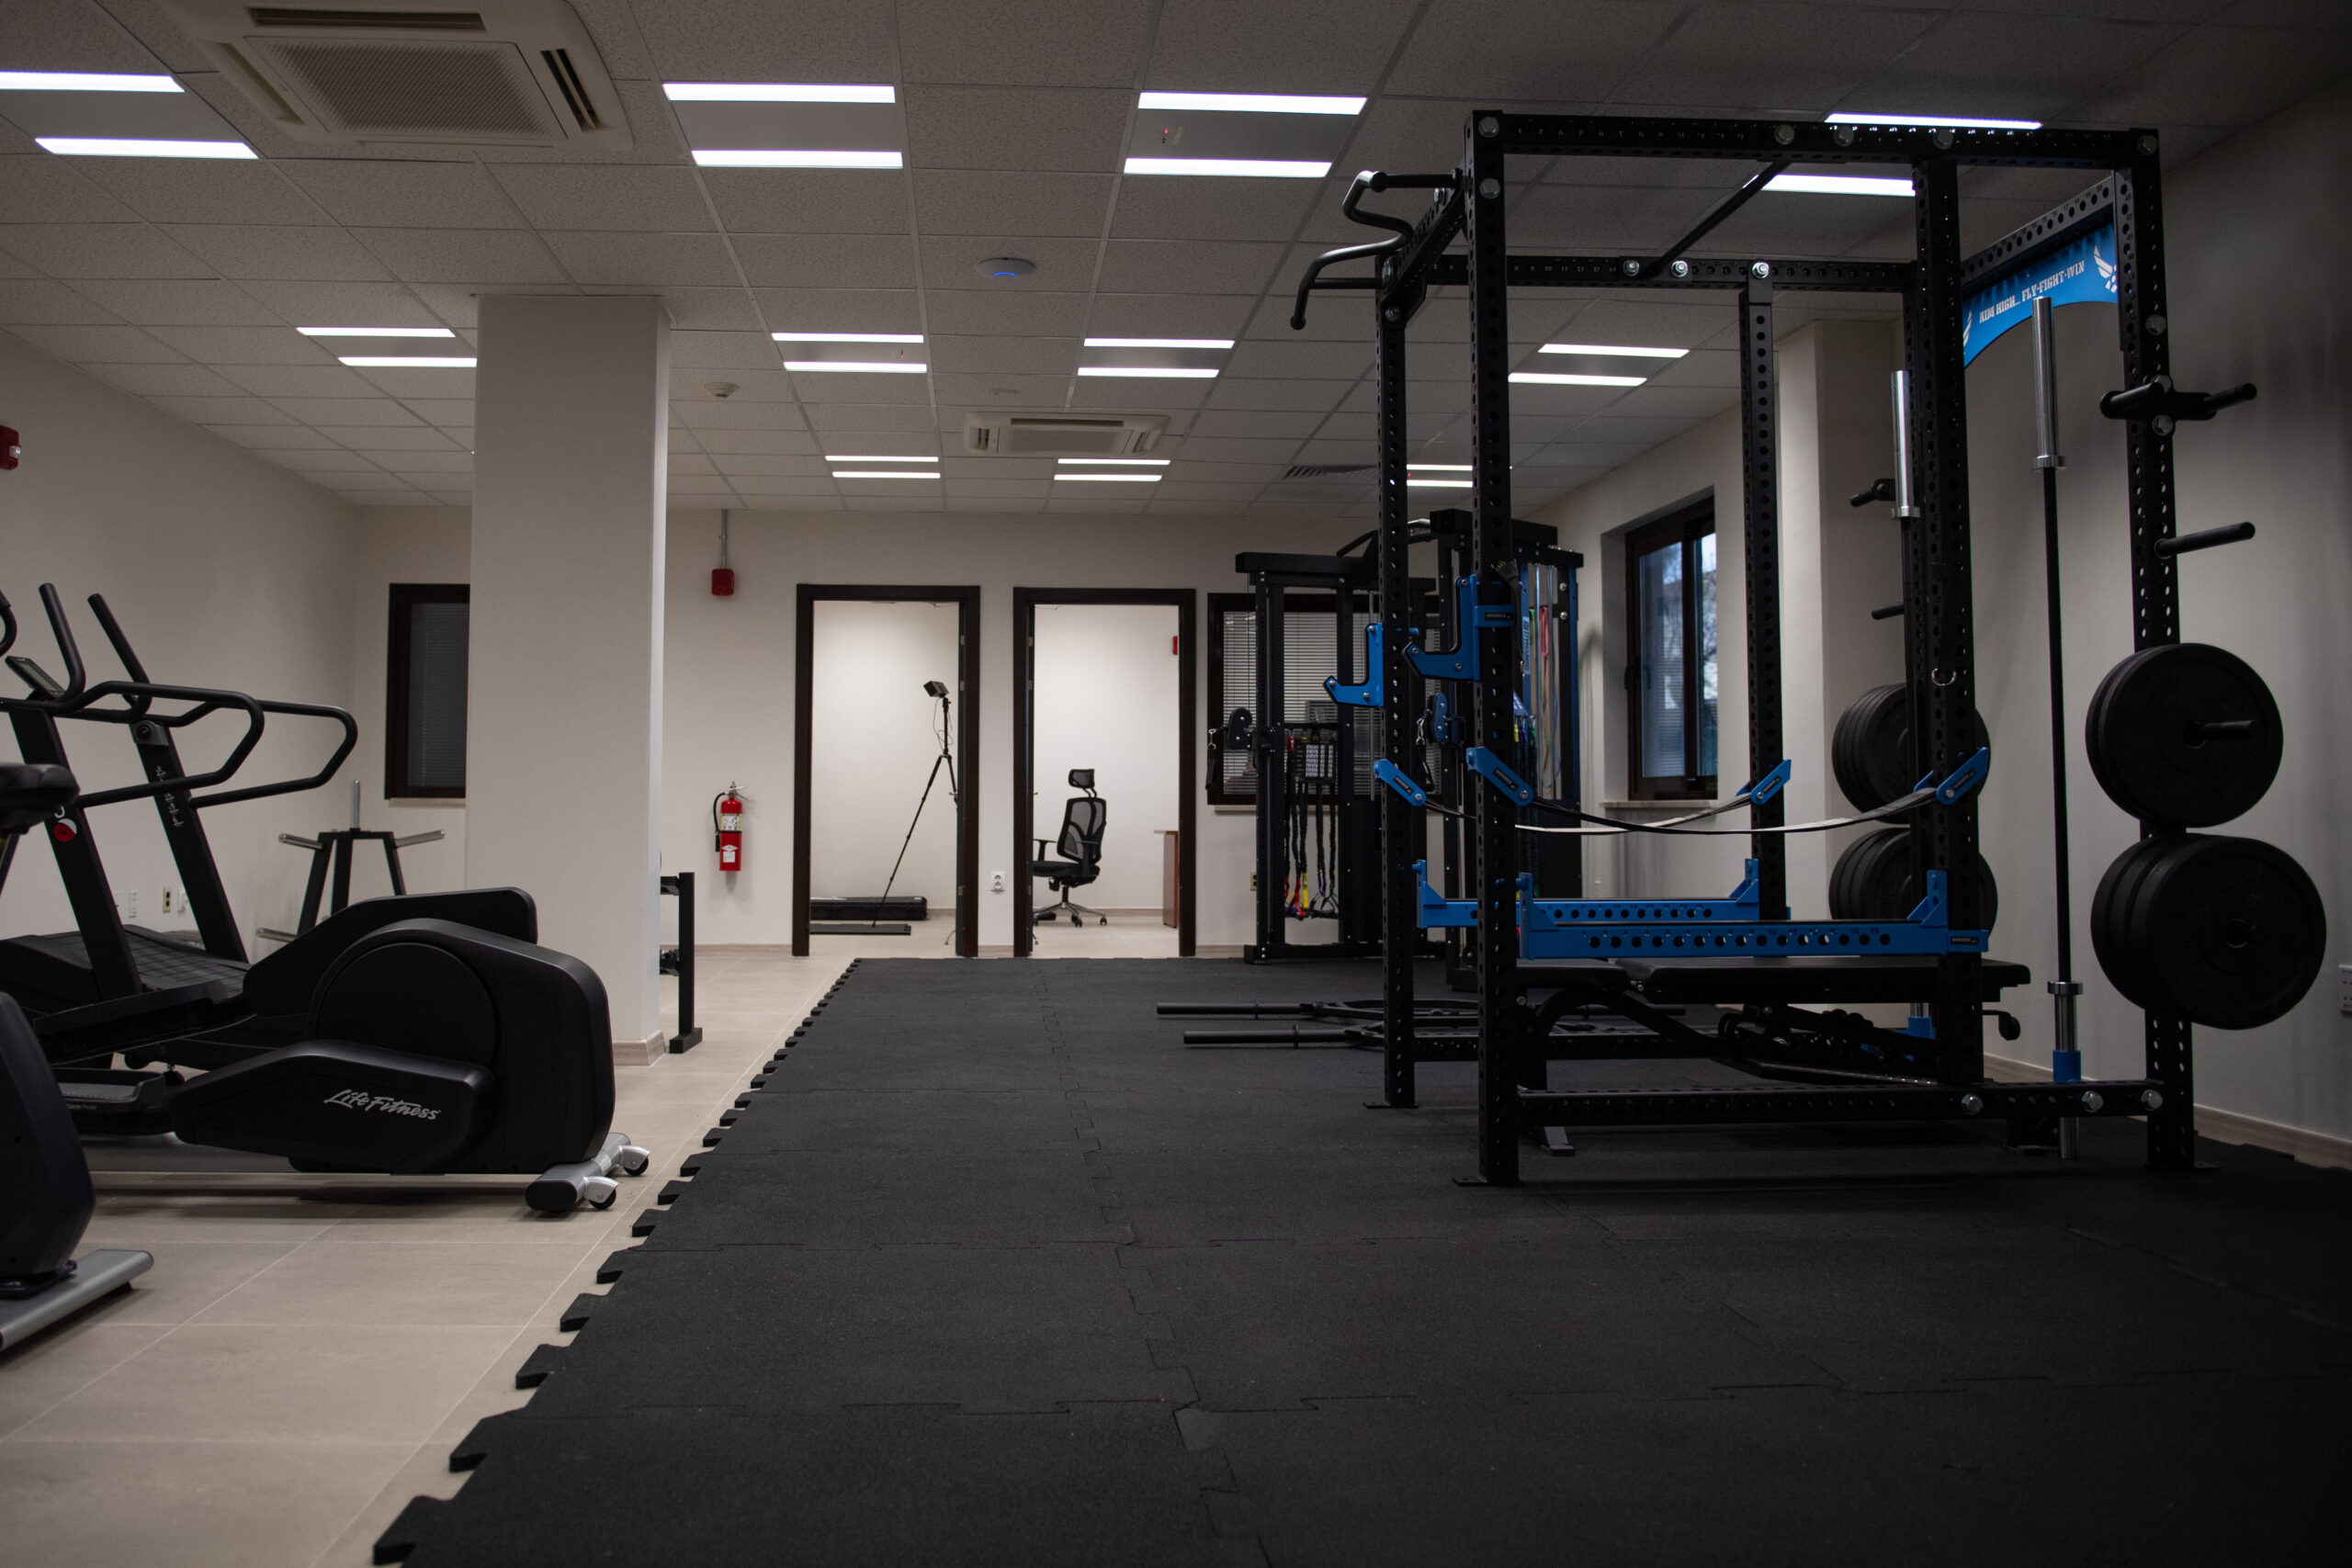 Exercise equipment is displayed inside the new Operational Support Team building at Incirlik Air Base, Türkiye, March 27, 2024. The new building is able to provide the OST their own space to work with their embedded squadron while also providing services to the wing. (U.S. Air Force photo by Staff Sgt. Suzie Plotnikov)